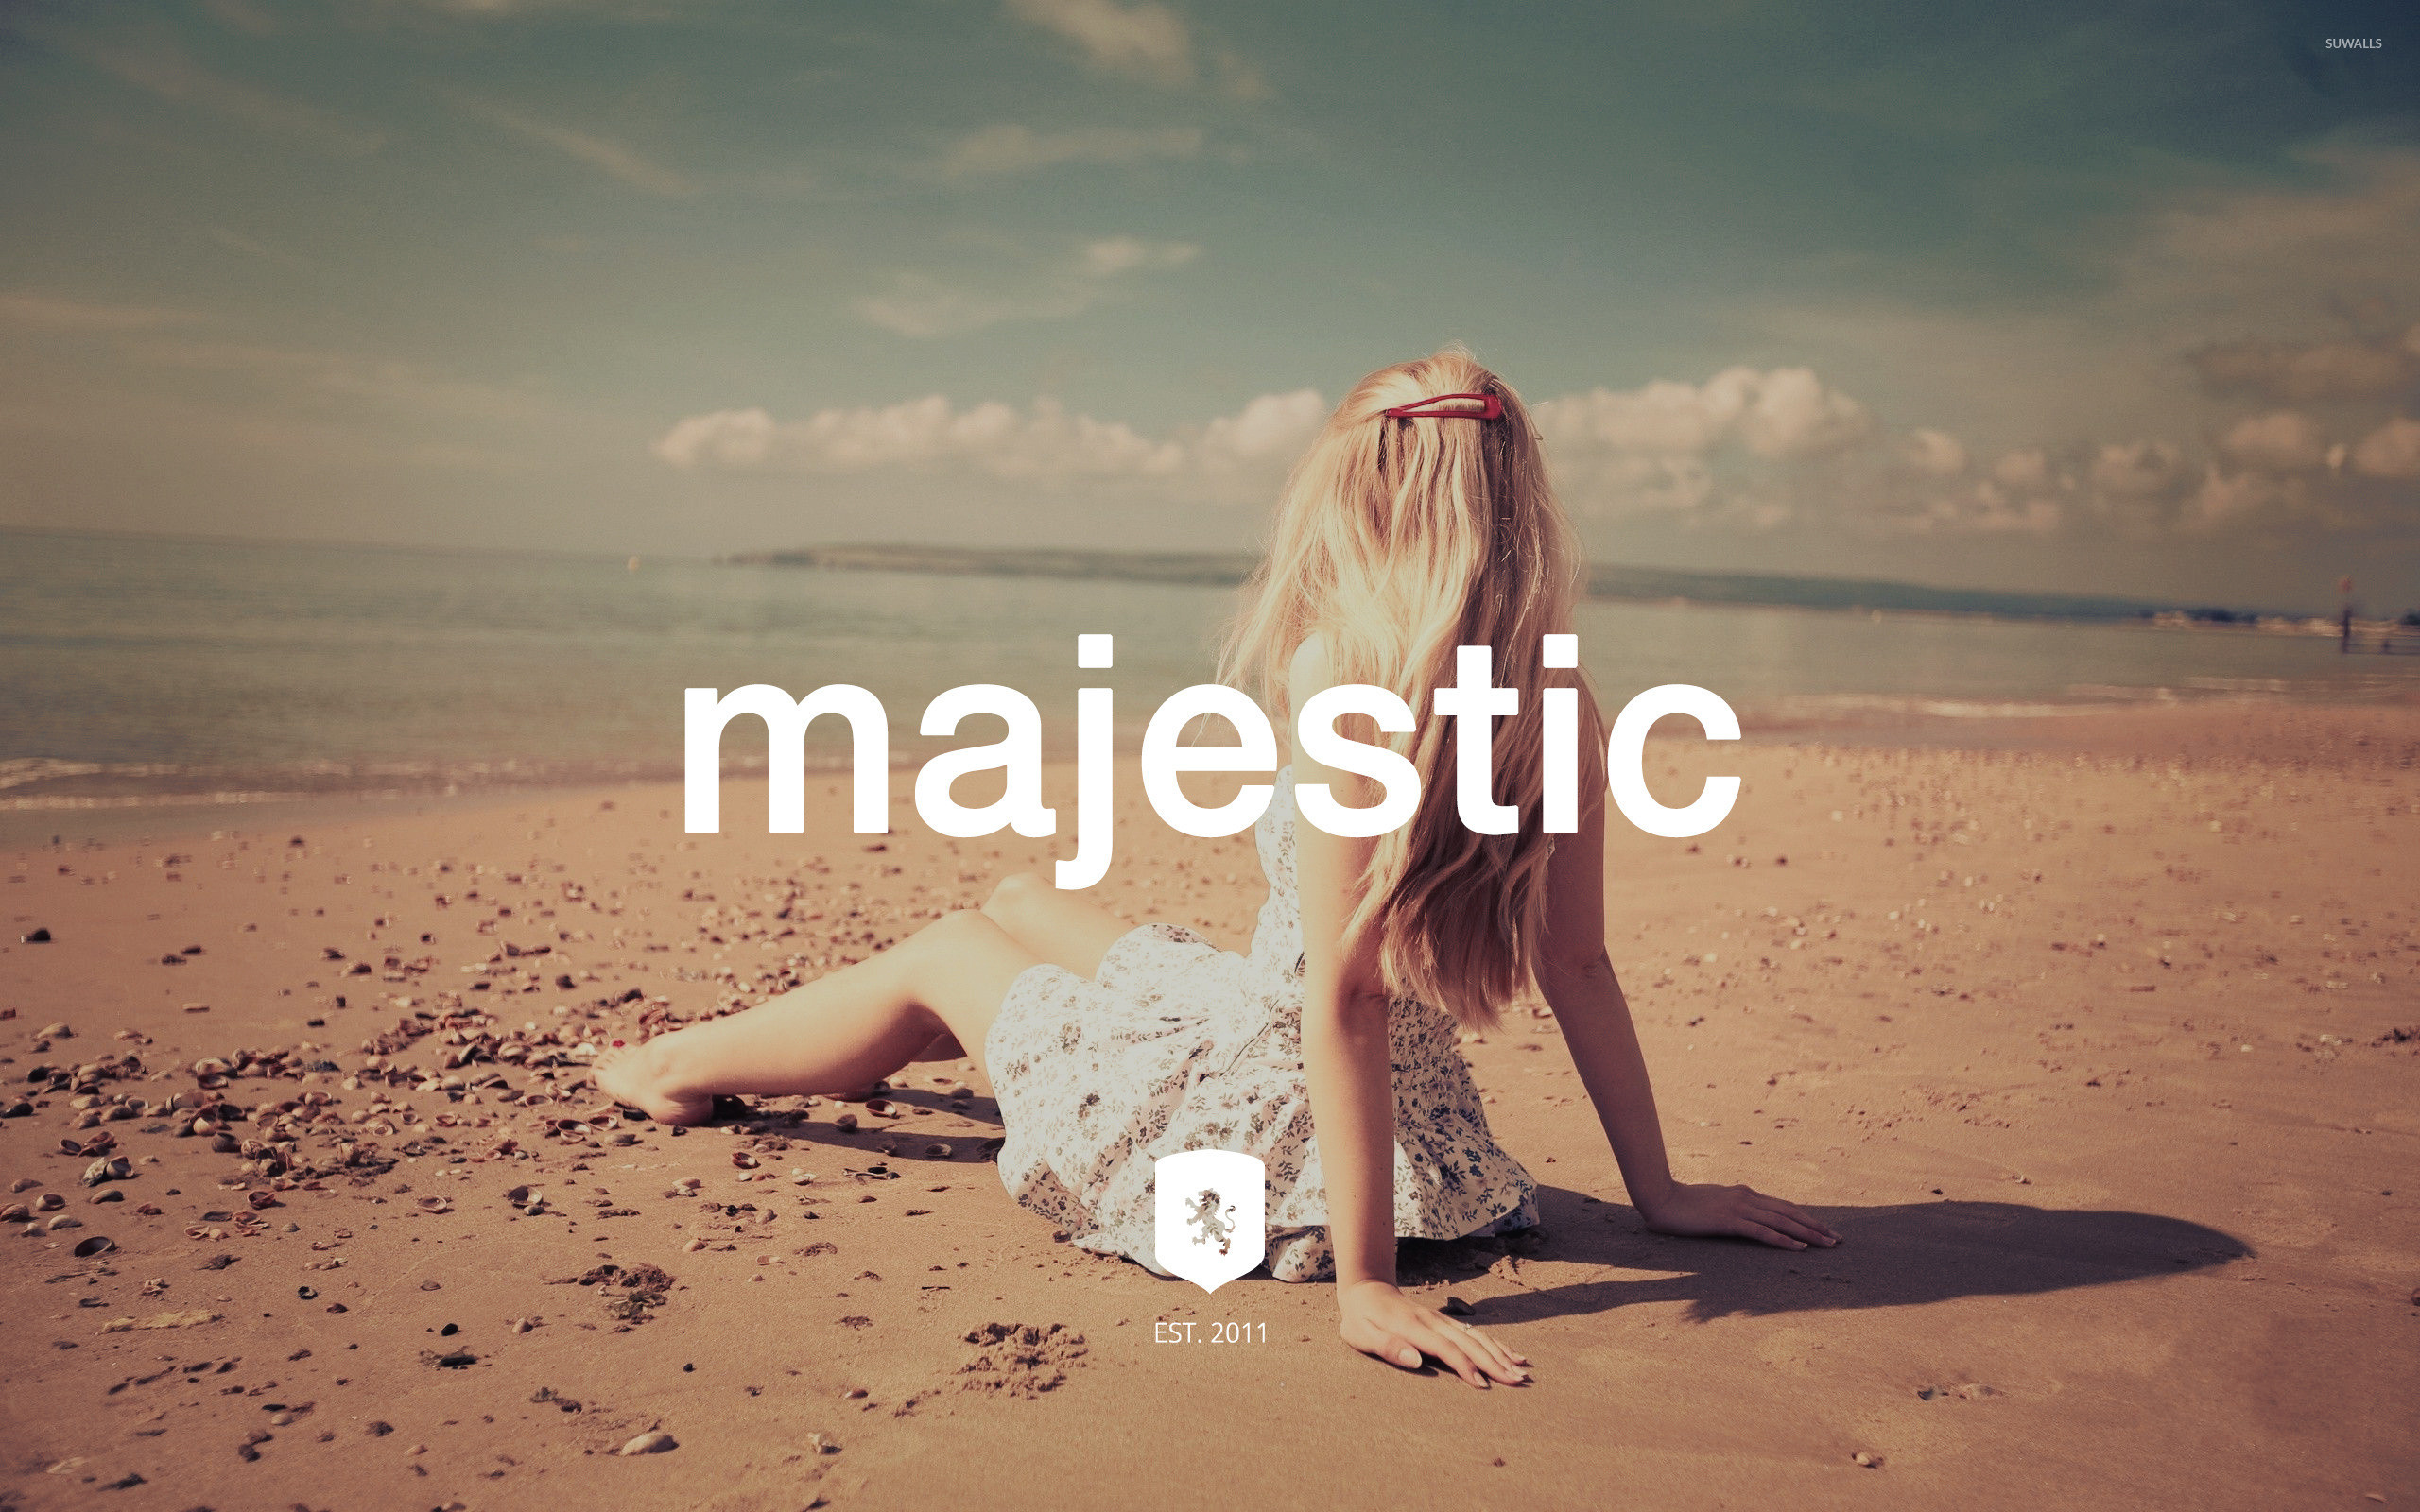 2560x1600 Majestic Casual logo on a blonde in a sundress wallpaper